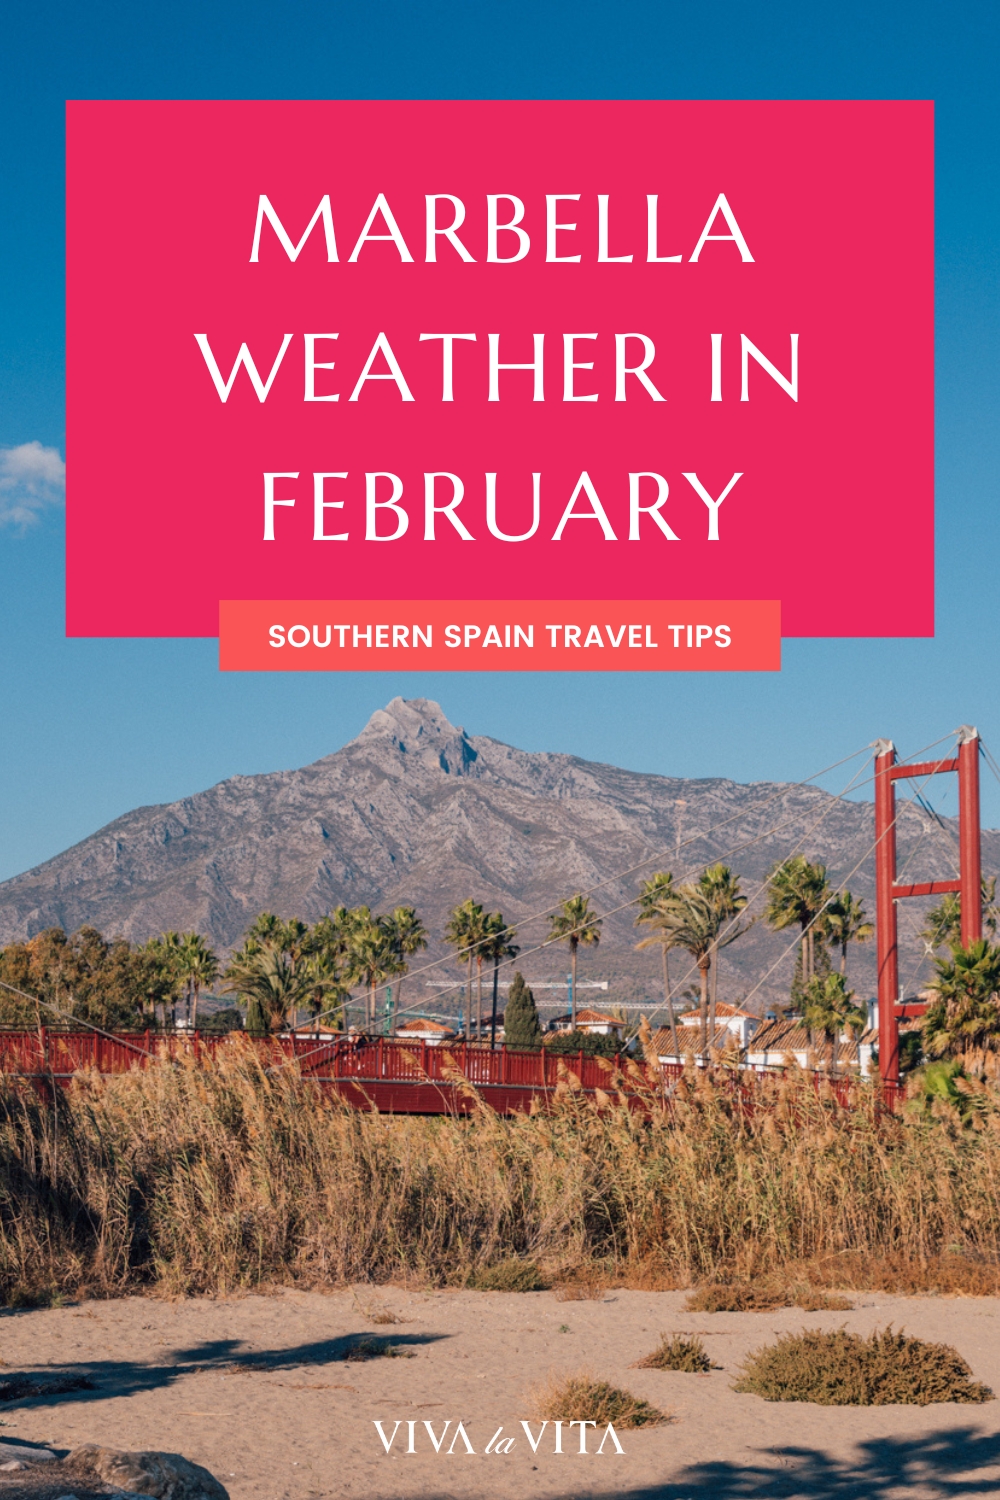 pinterest image for an article about marbella weather in february